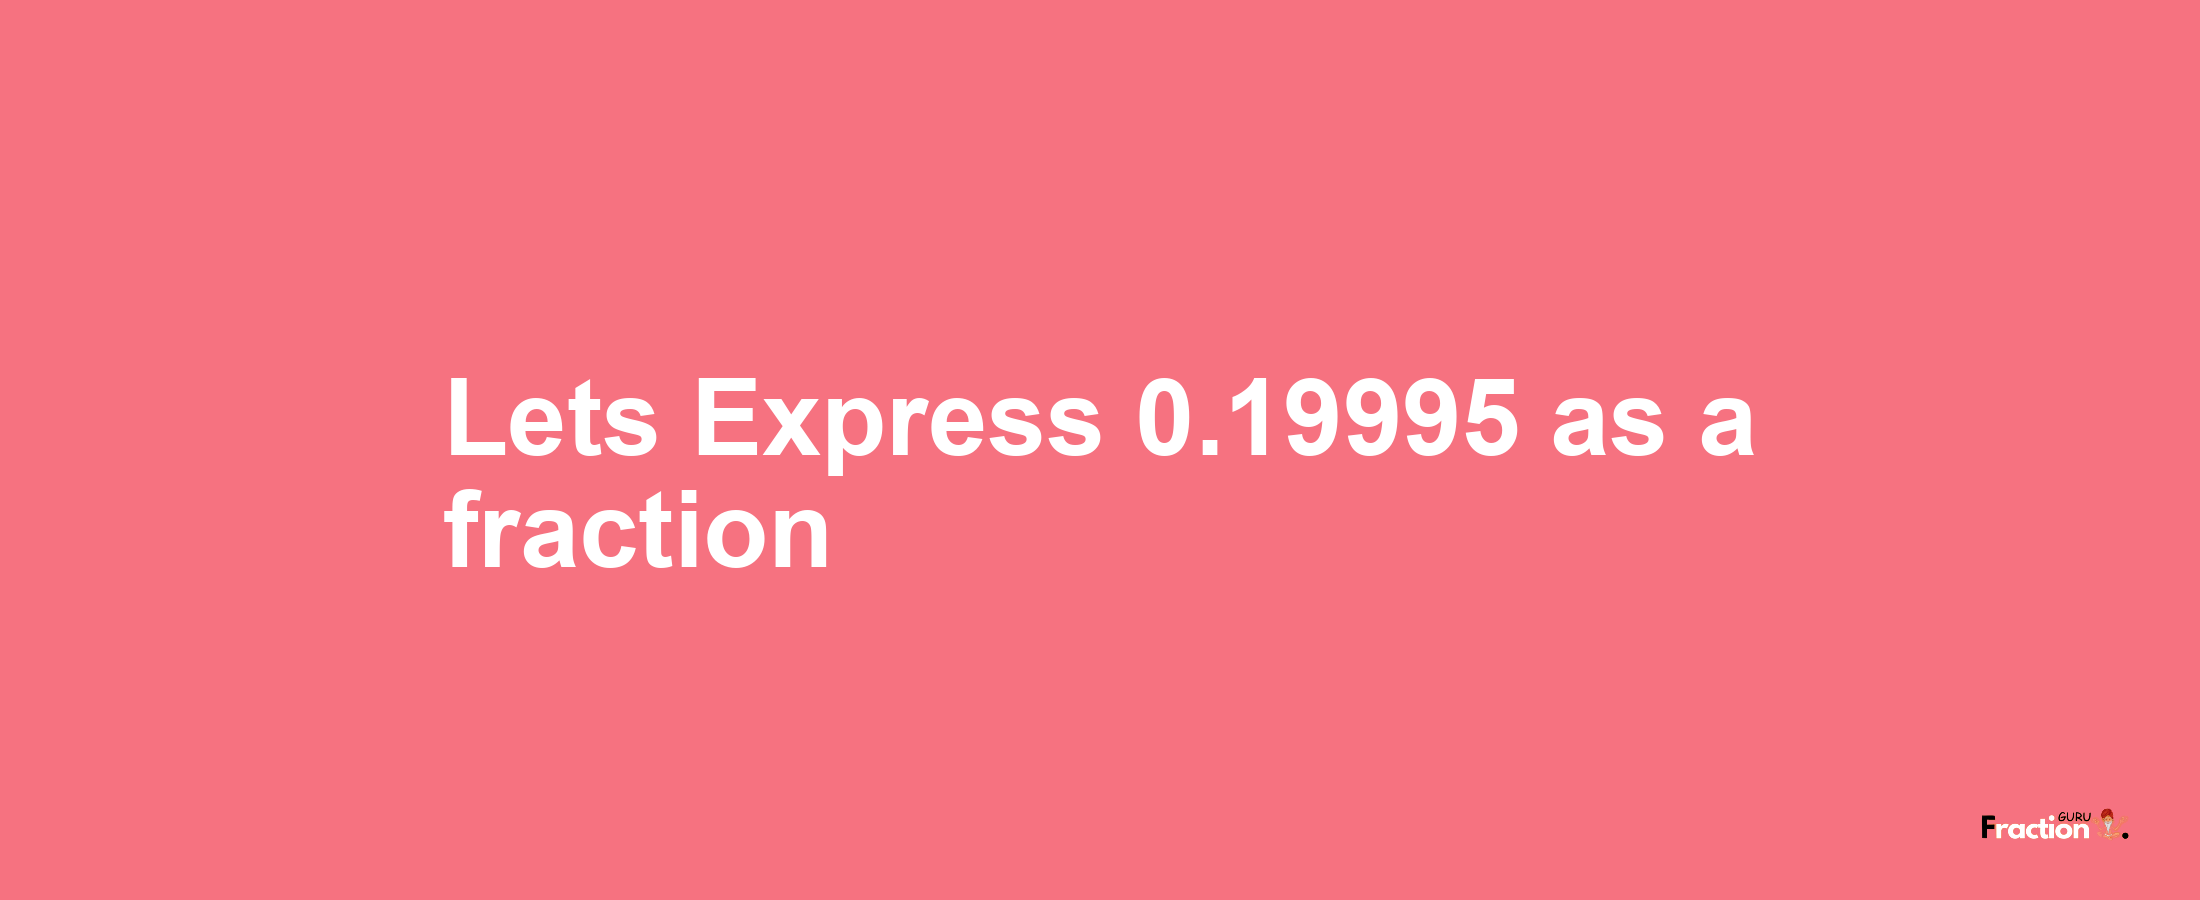 Lets Express 0.19995 as afraction